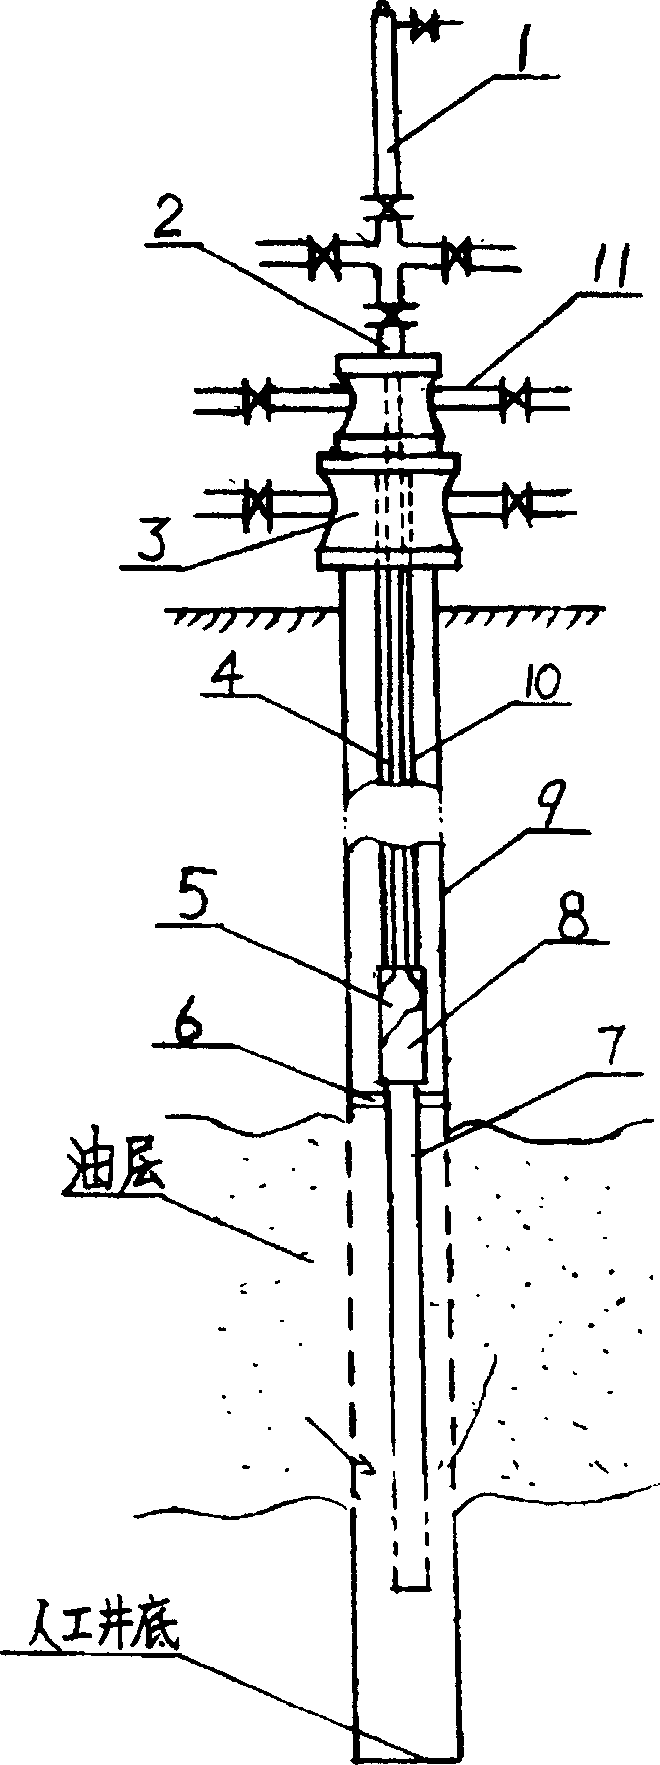 Sand-discharge oil production method and equipment